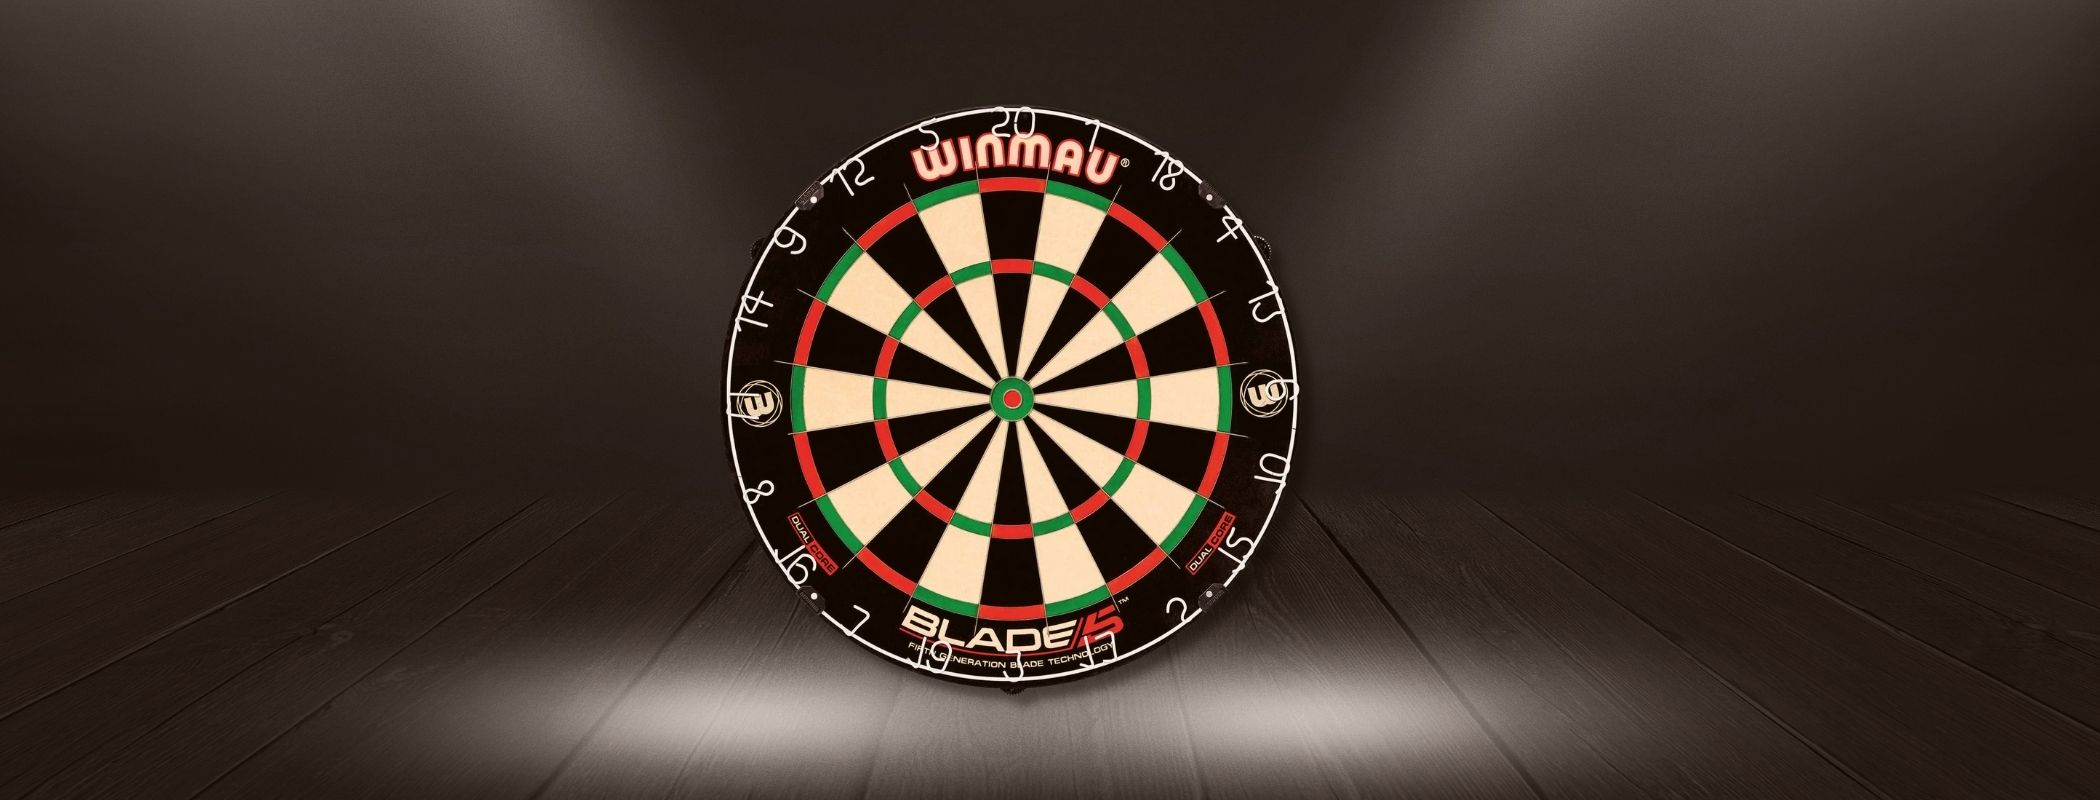 Details about   Winmau Blade 5 Bristle Dartboard with All-New Thinner Wiring for Higher Scori... 